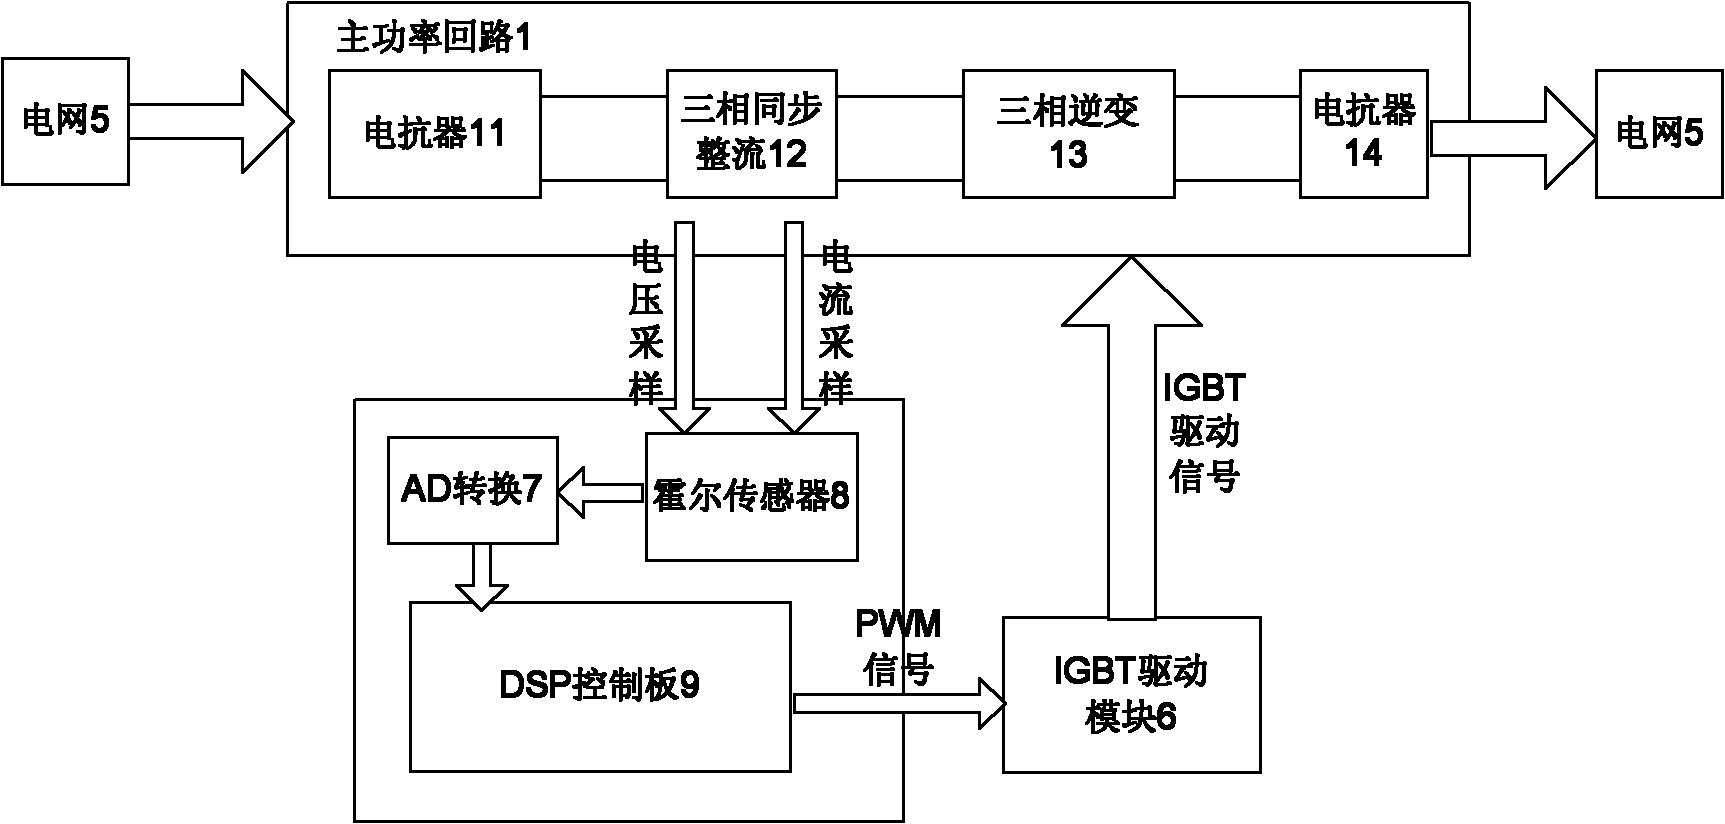 Experimental device for high-power photovoltaic grid-connected inverter